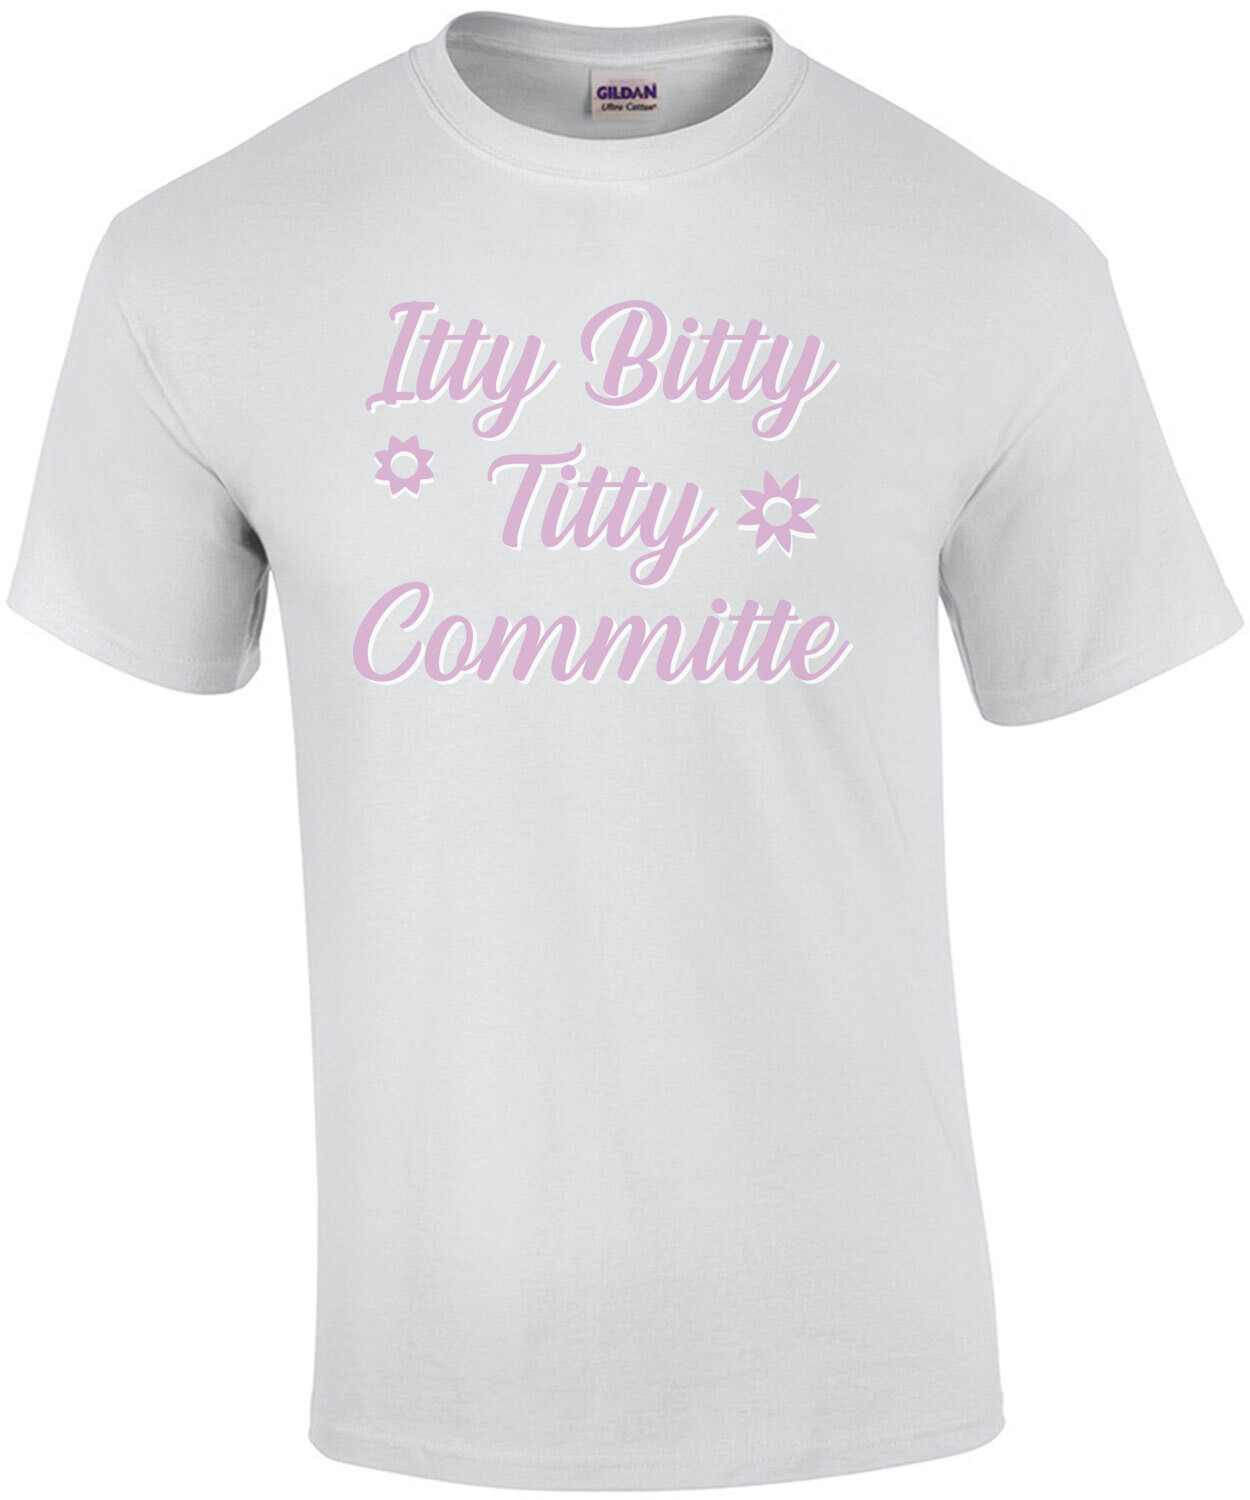 Itty Bitty Titty Committe - Small Breast T-Shirt